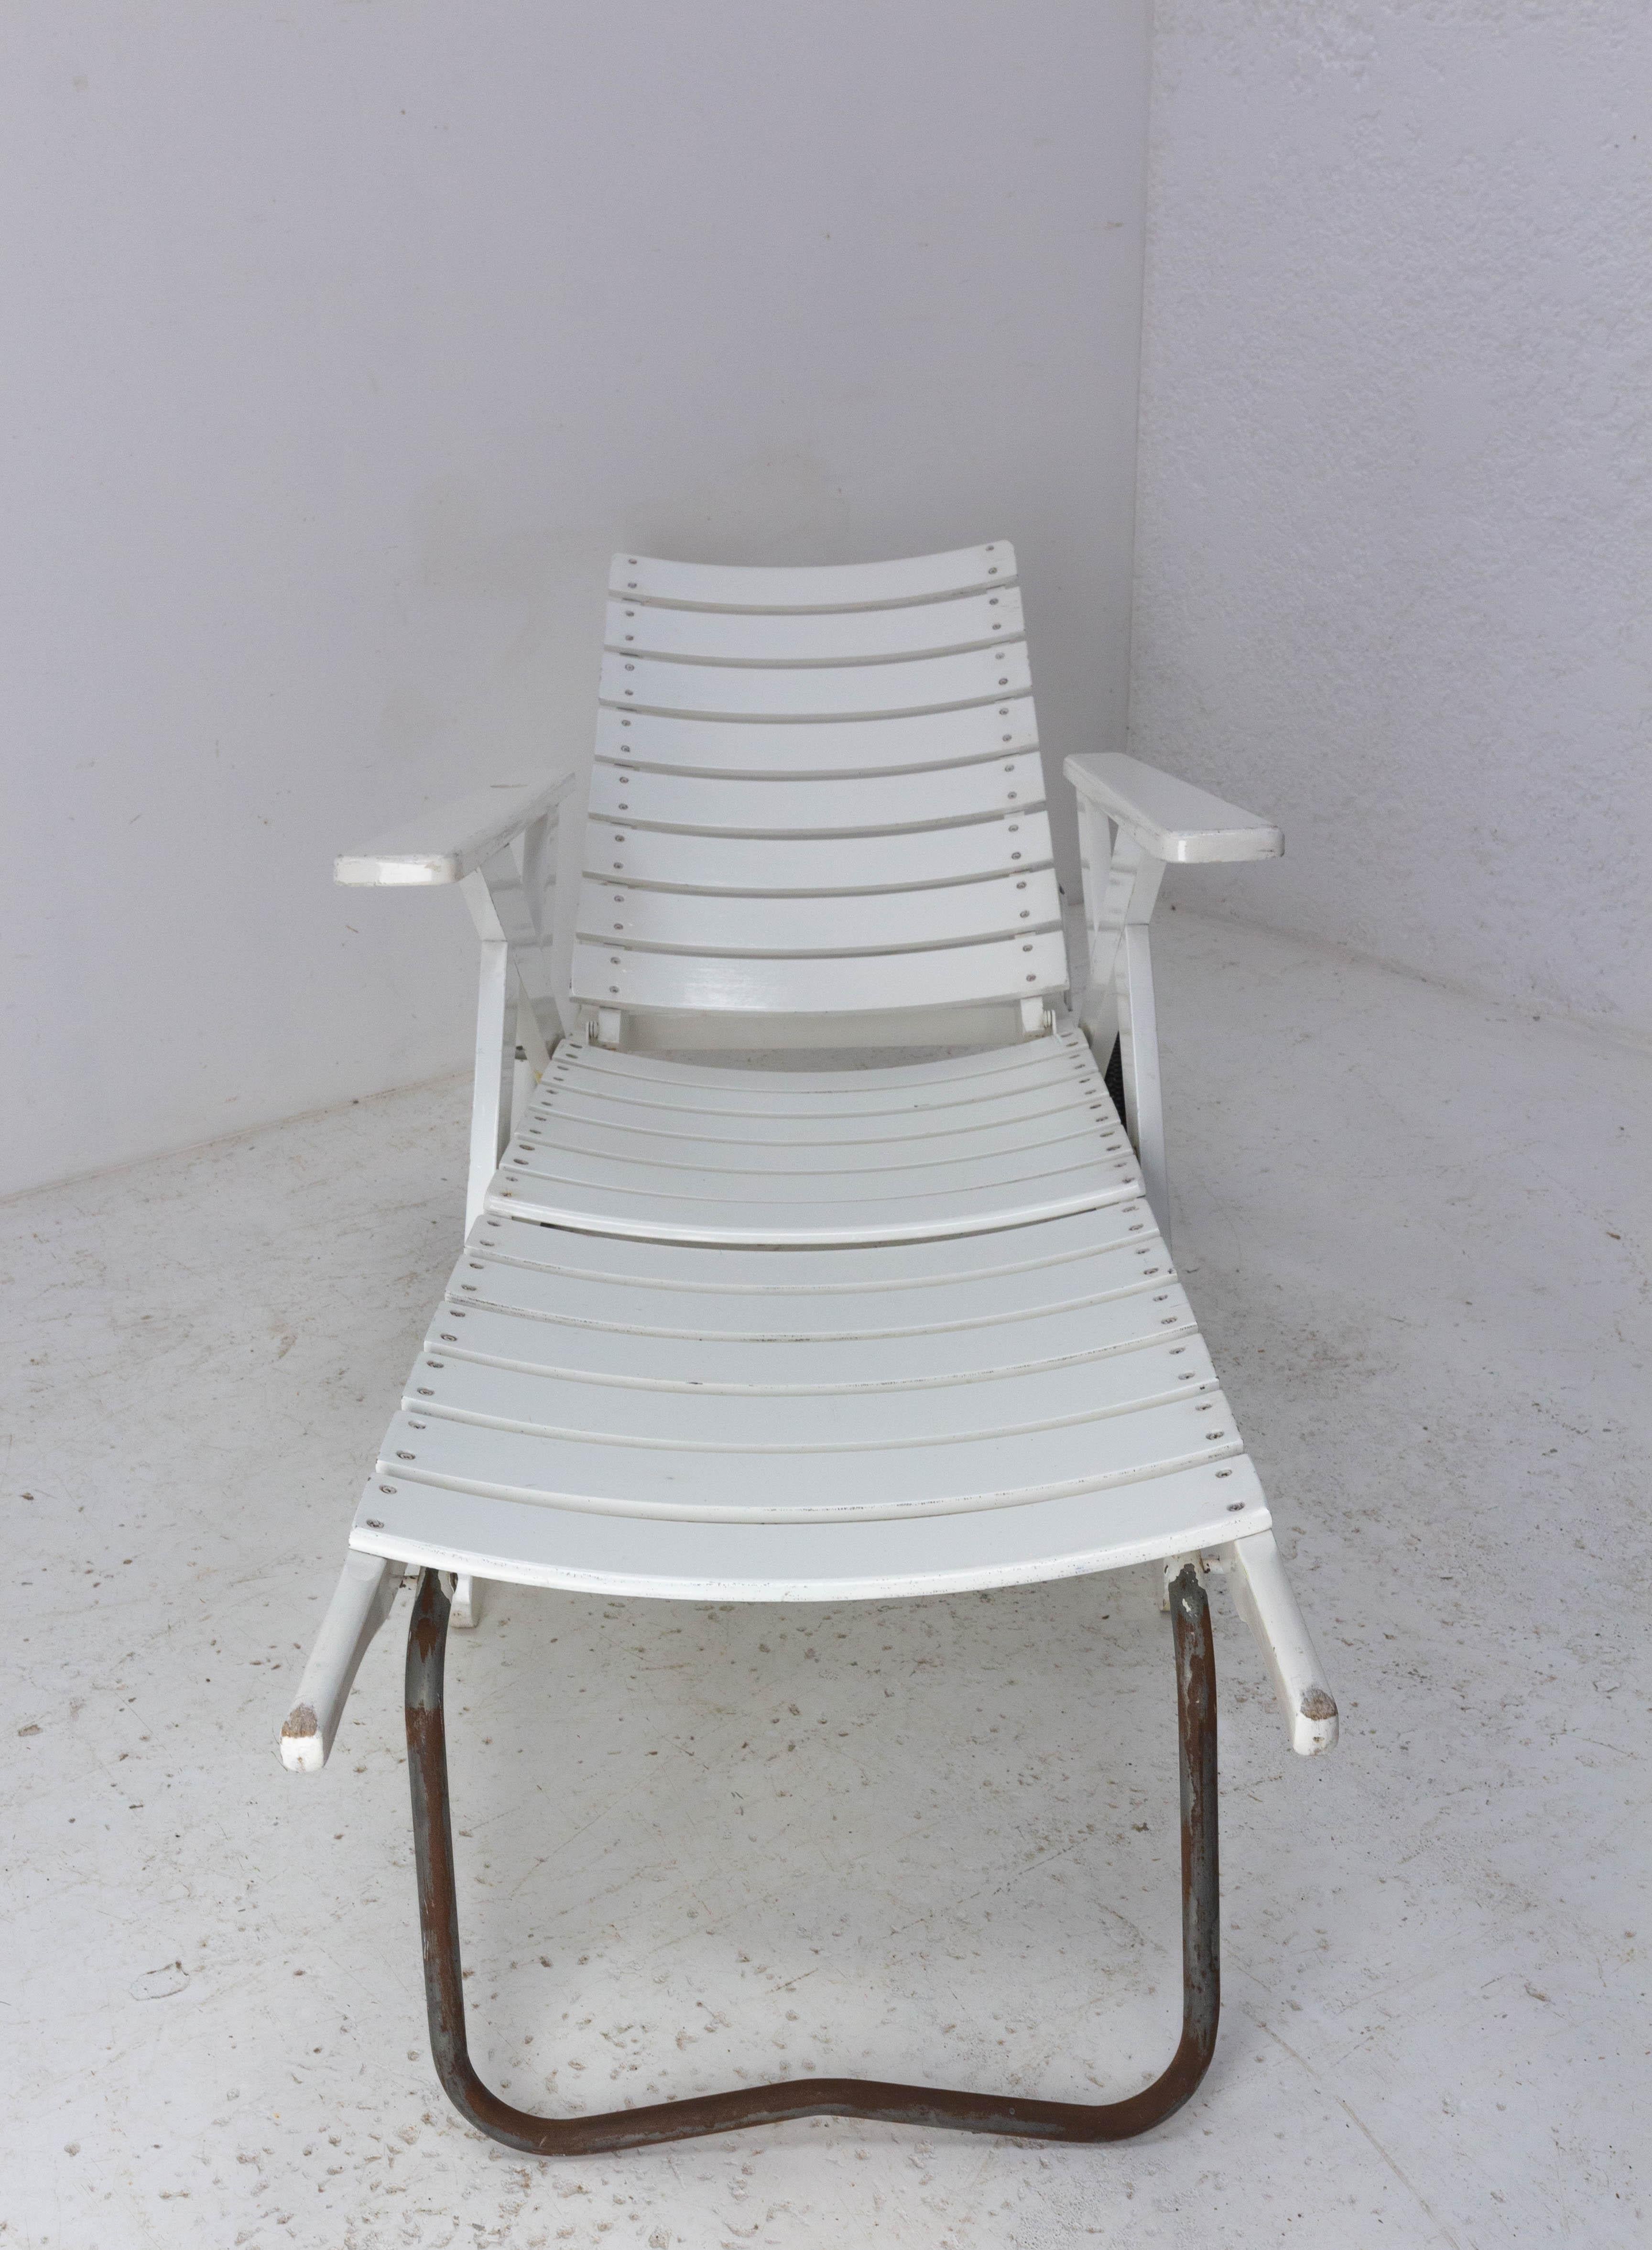 Transat Deck Chair Patio Lounger, French, circa 1960 In Good Condition For Sale In Labrit, Landes